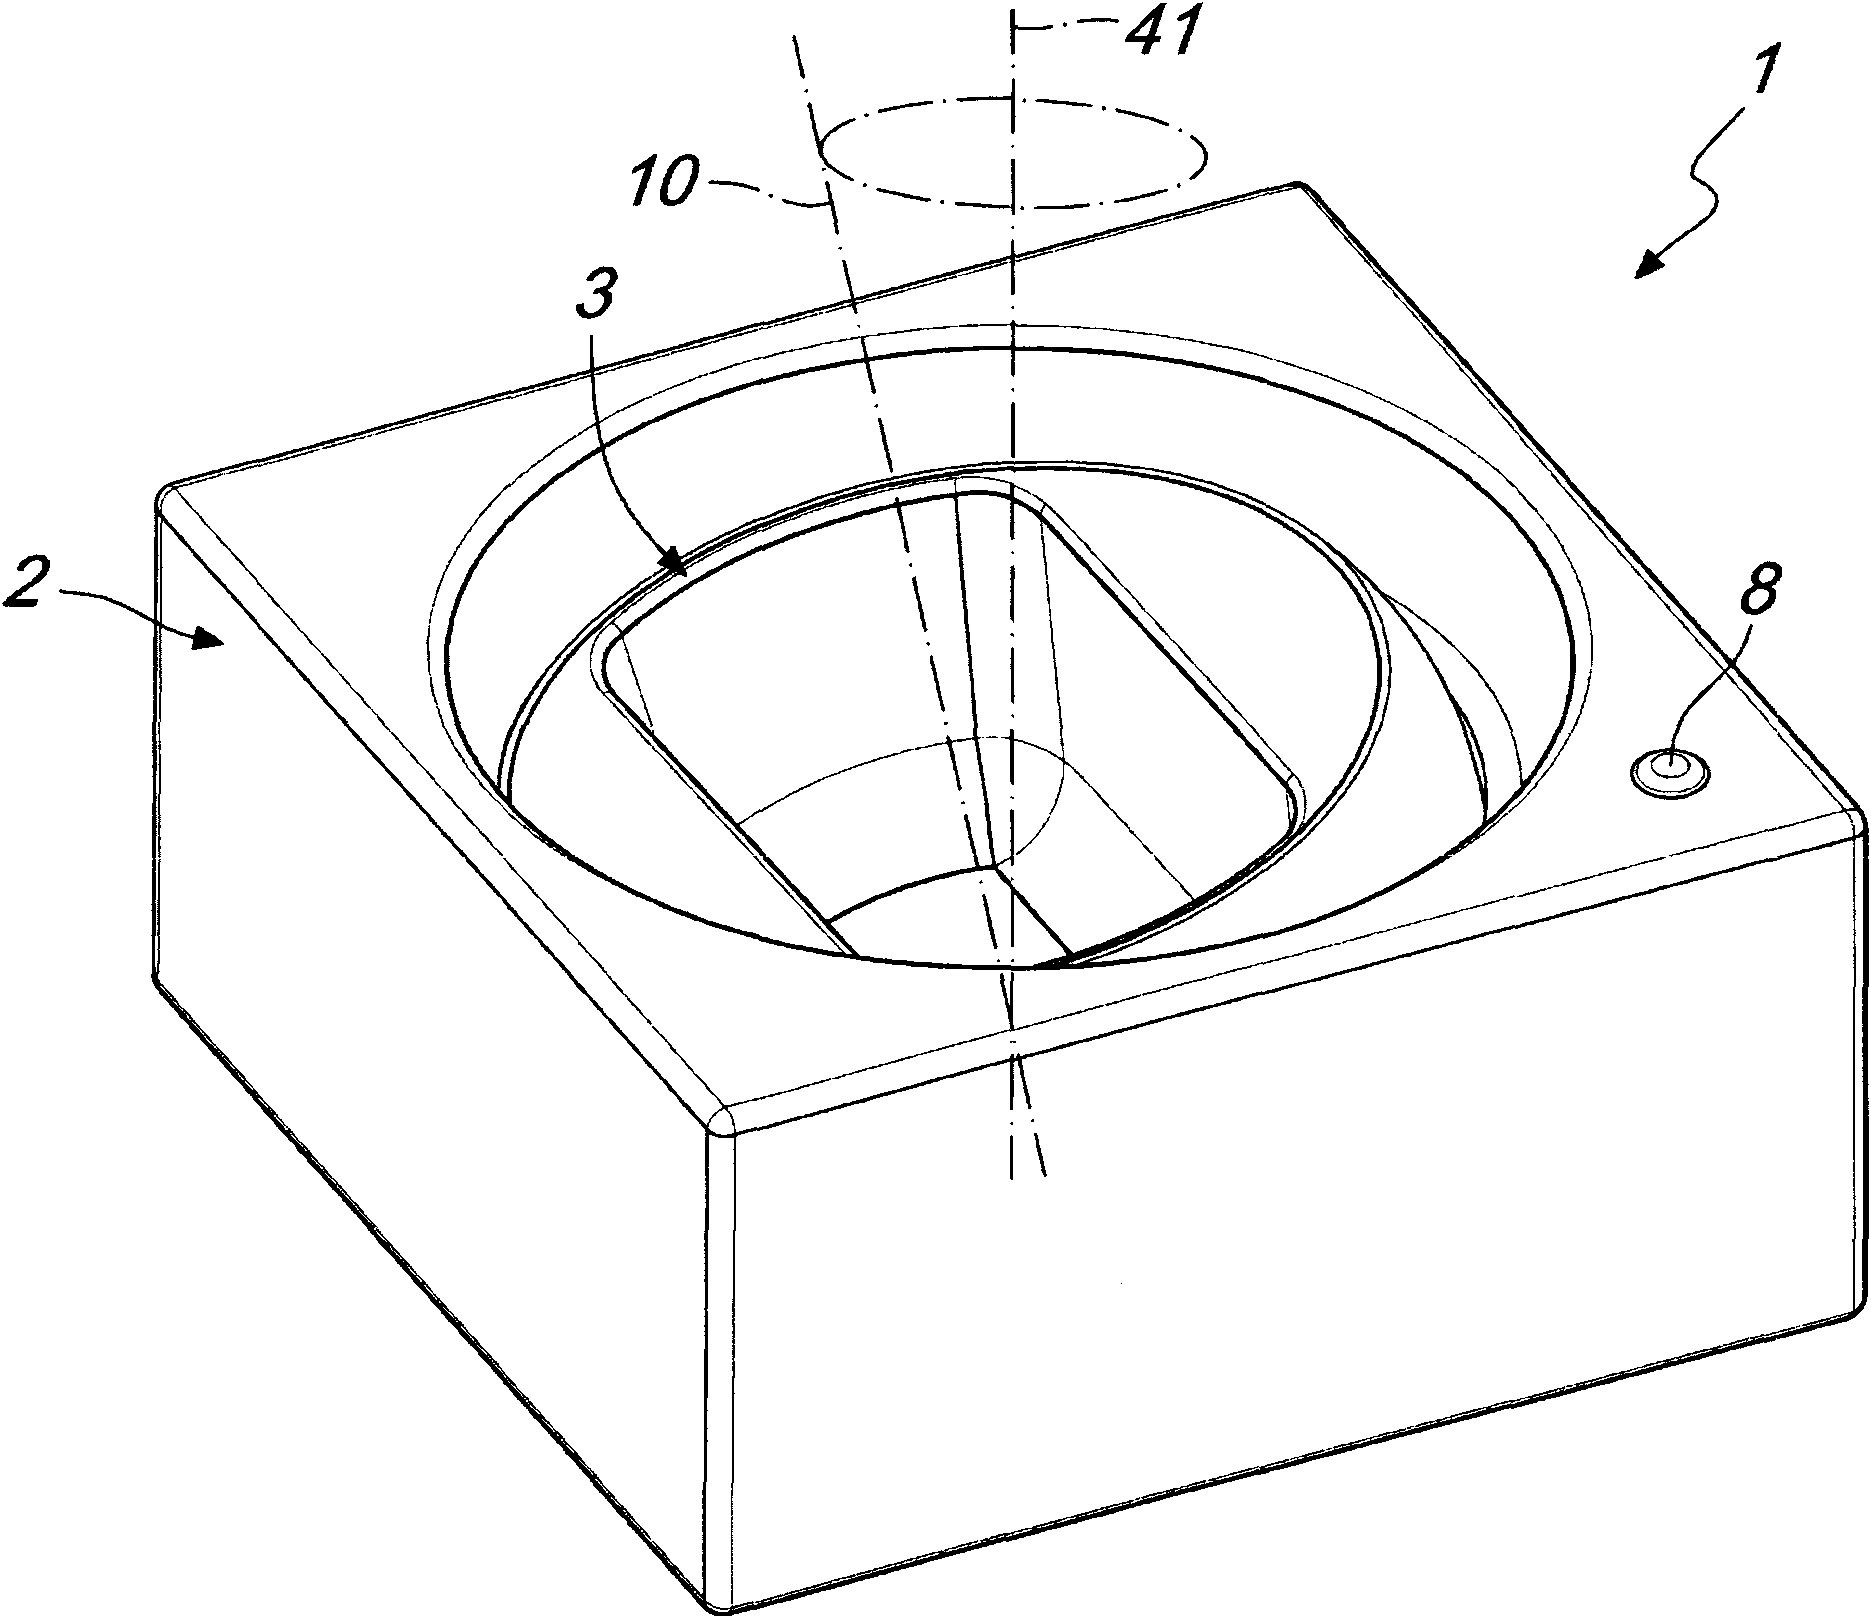 Device for winding watches, in particular self-winding watches